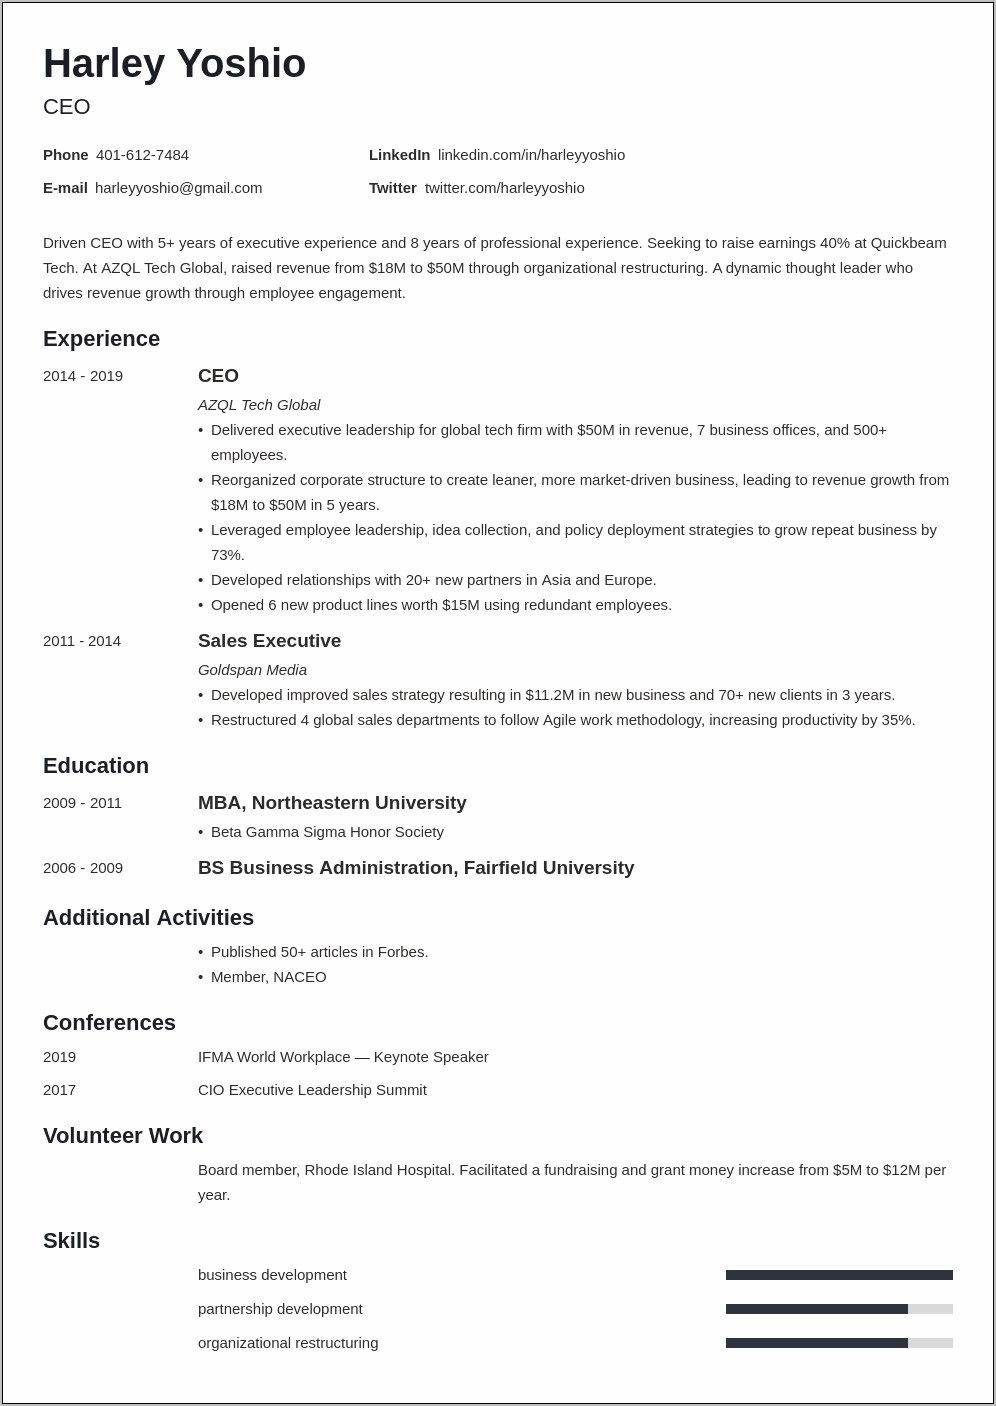 Resume Language For Ceo Job Search